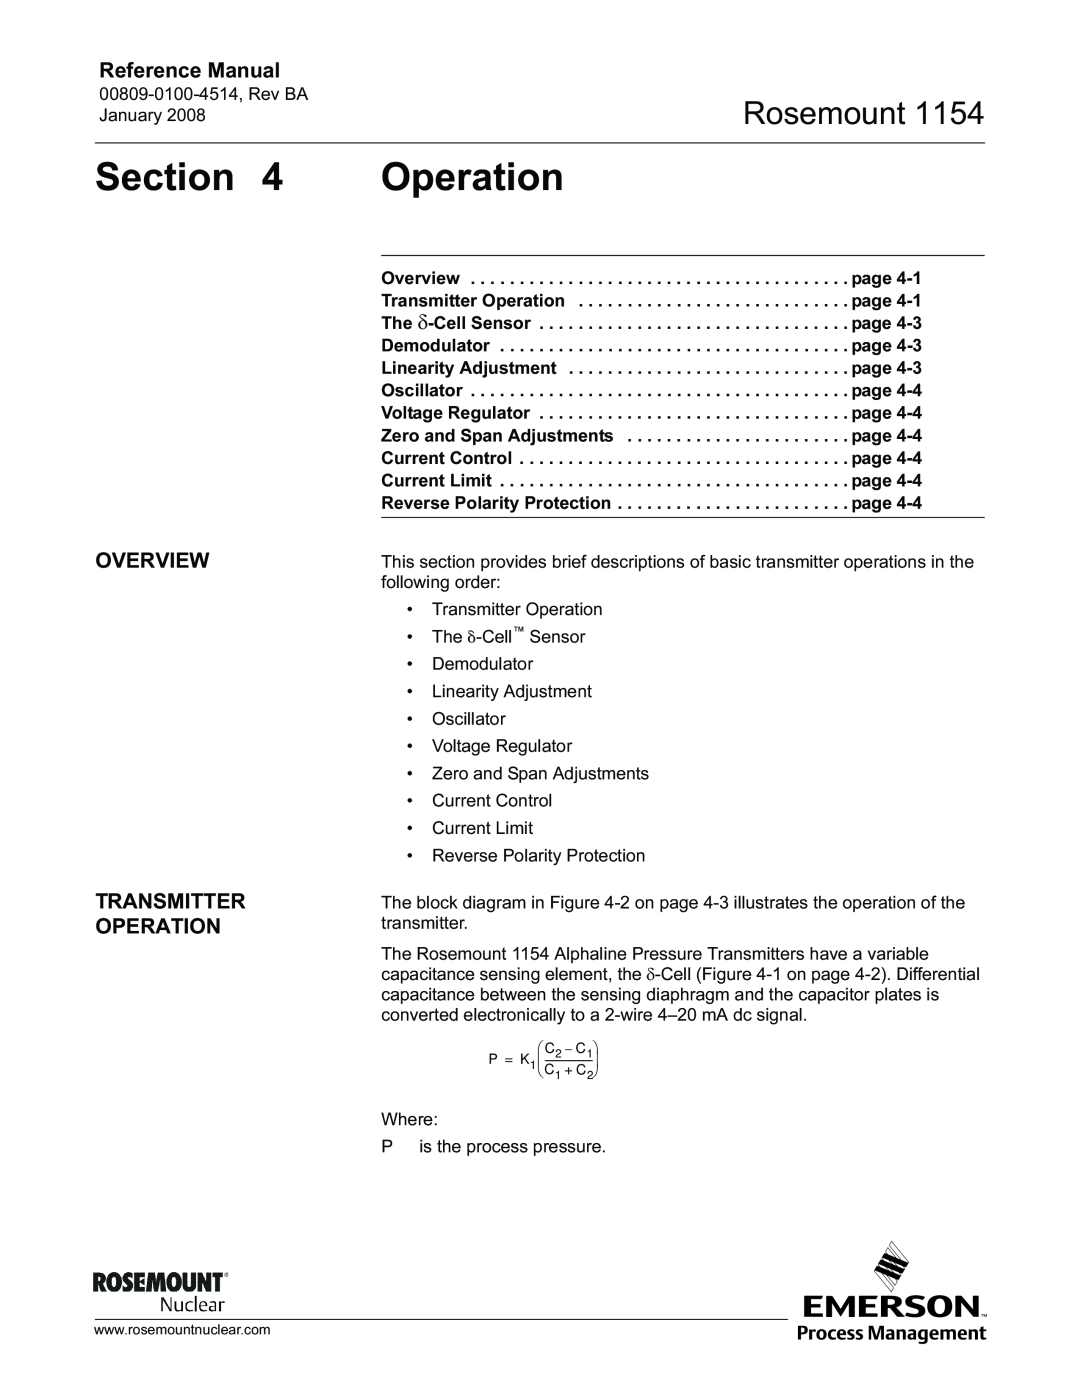 Emerson 1154, 00809-0100-4514 manual Overview Transmitter Operation, Section, Rosemount, Reference Manual 